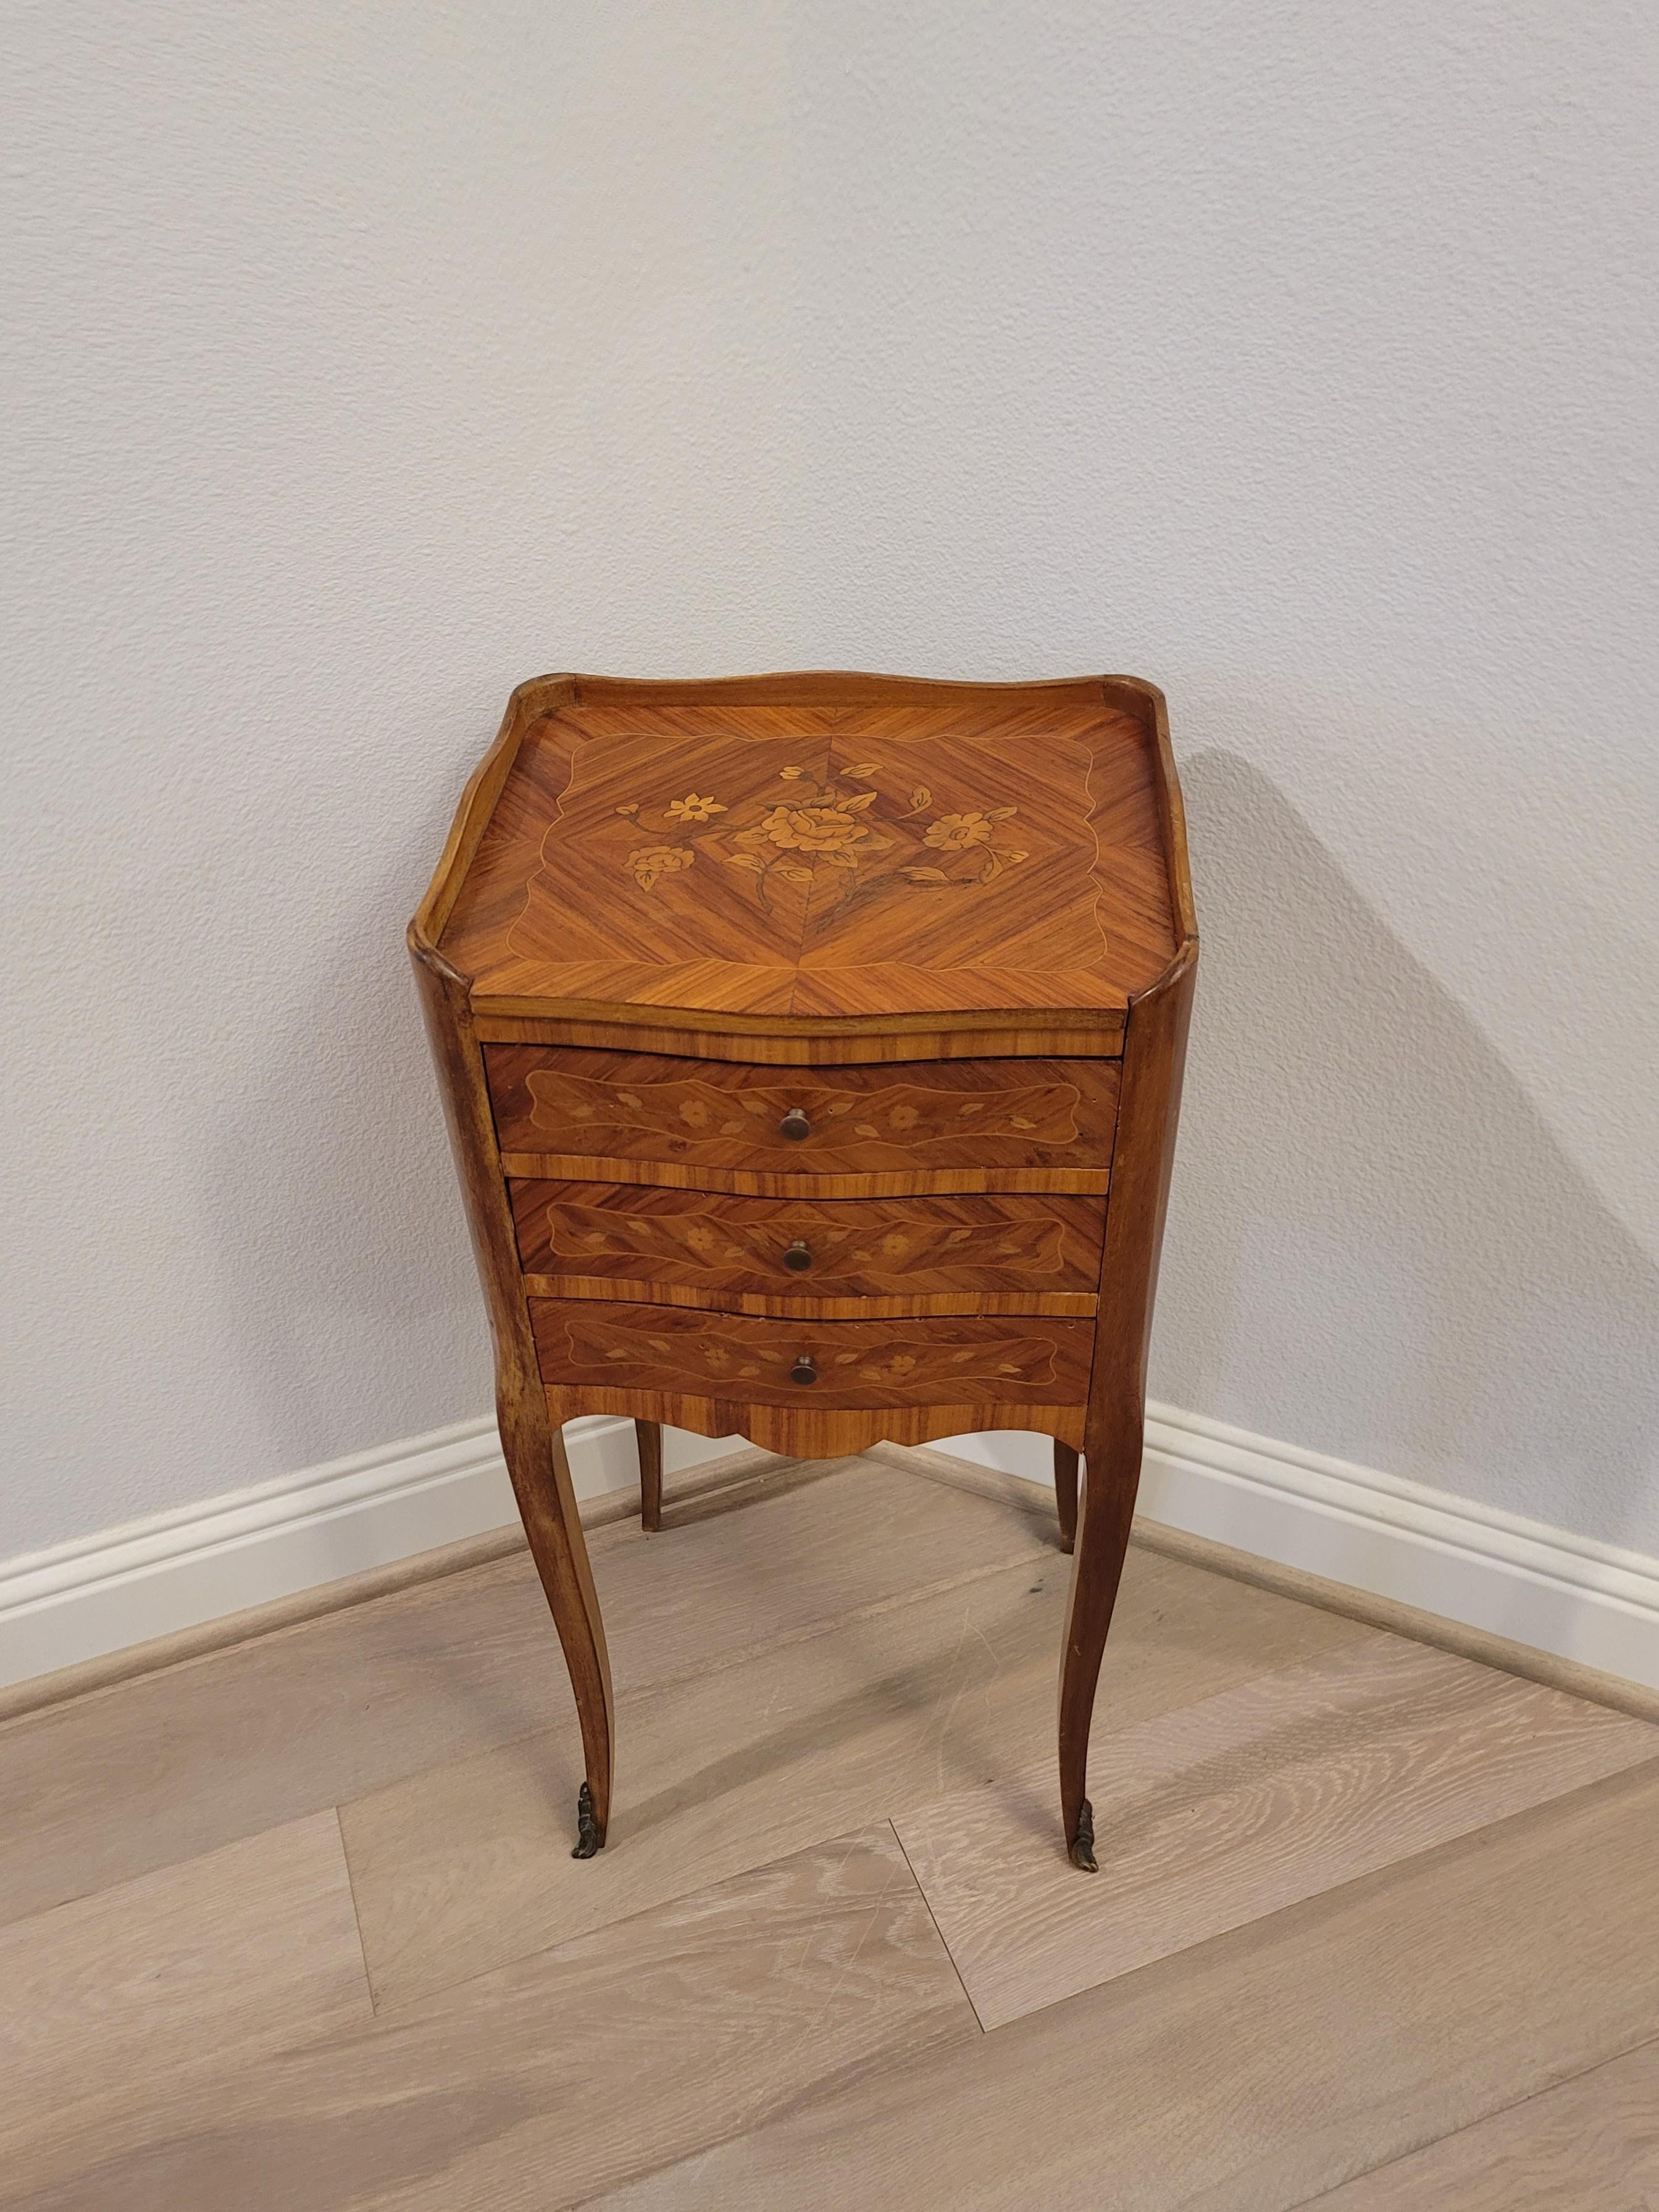 Hand-Crafted Antique French Louis XV Style Floral Marquetry Nightstand Table